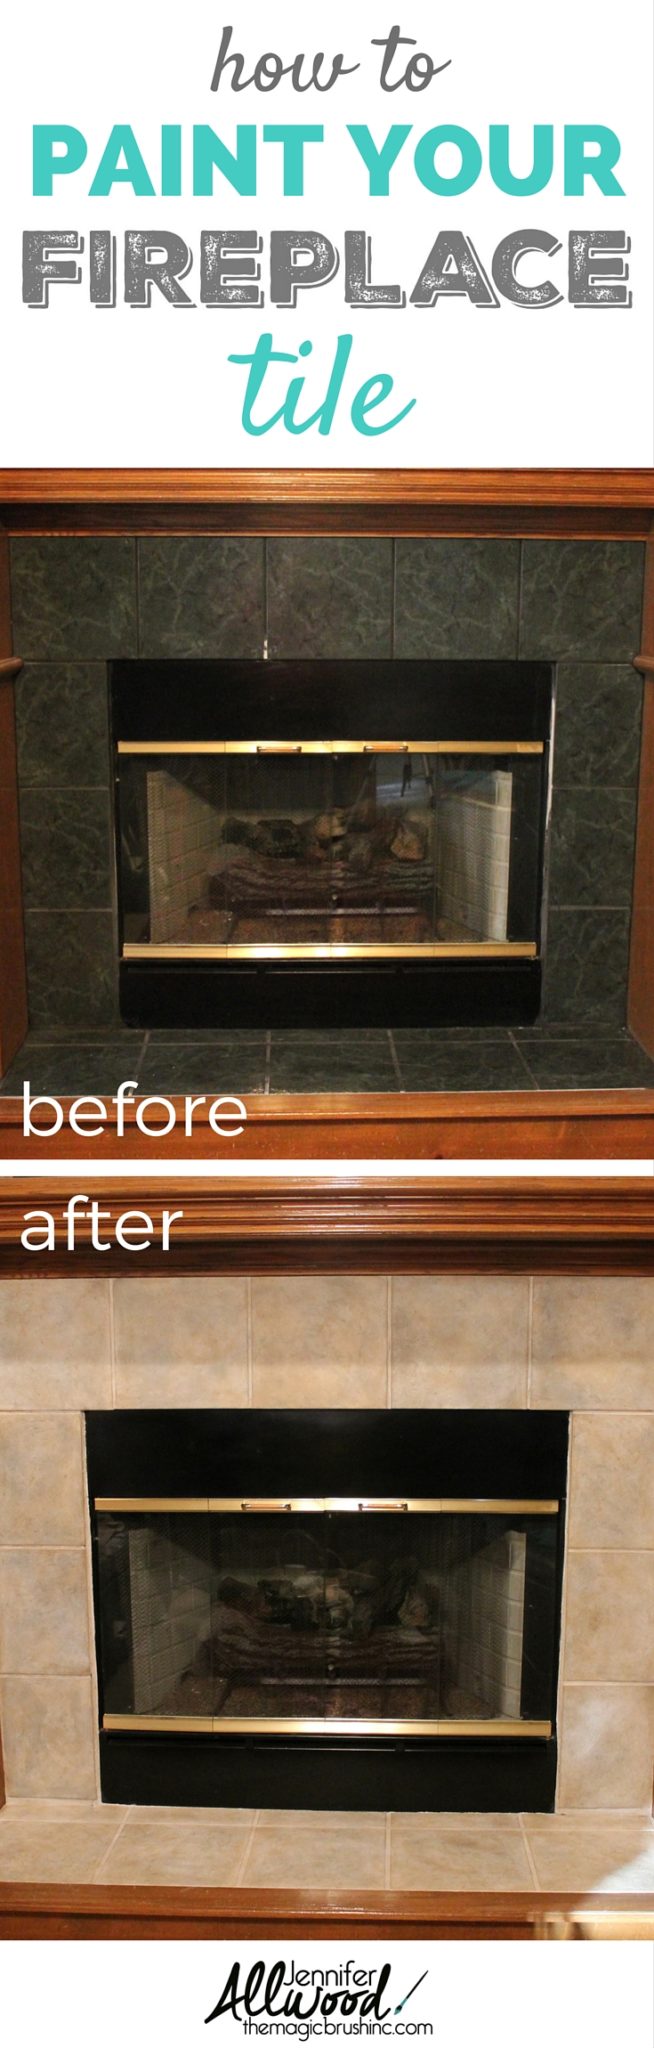 Fireplace Tile can be painted to completely update your Living Room